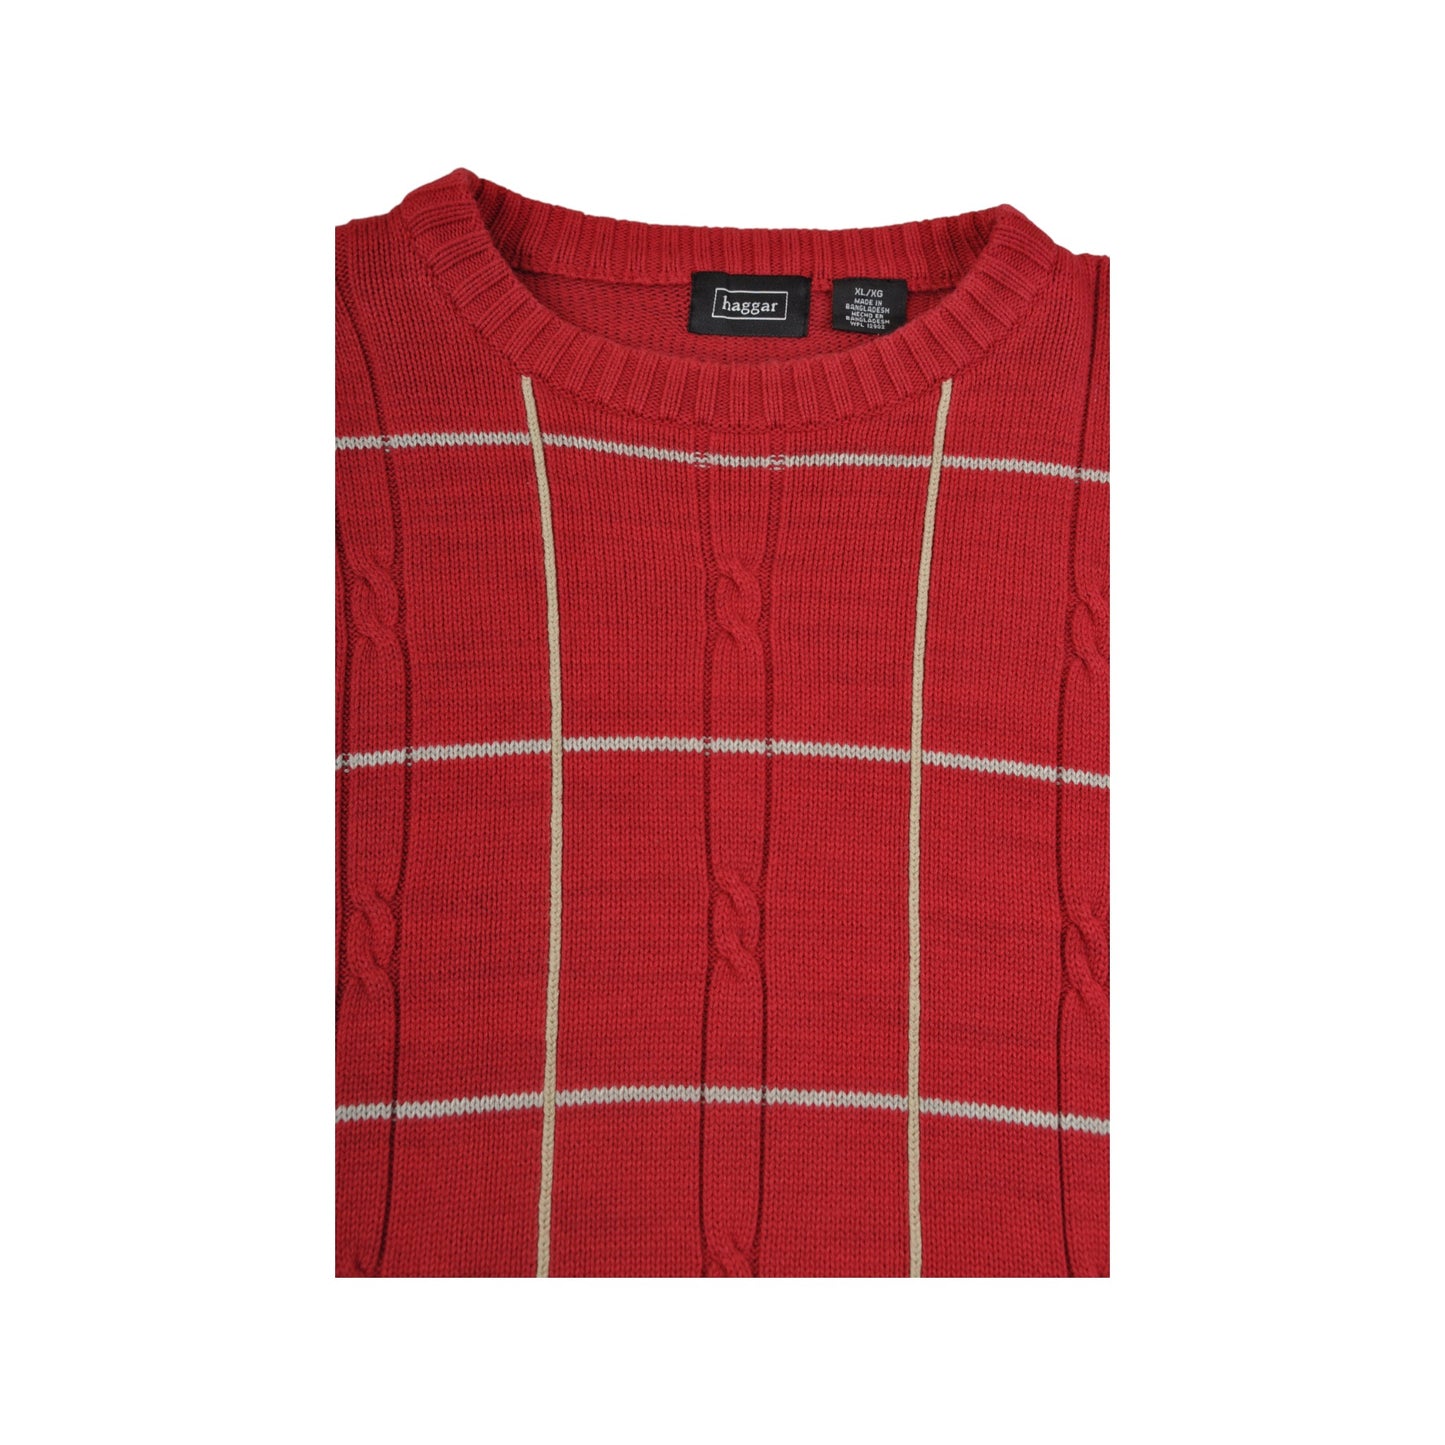 Vintage Knitwear Sweater Checked Pattern Red XL